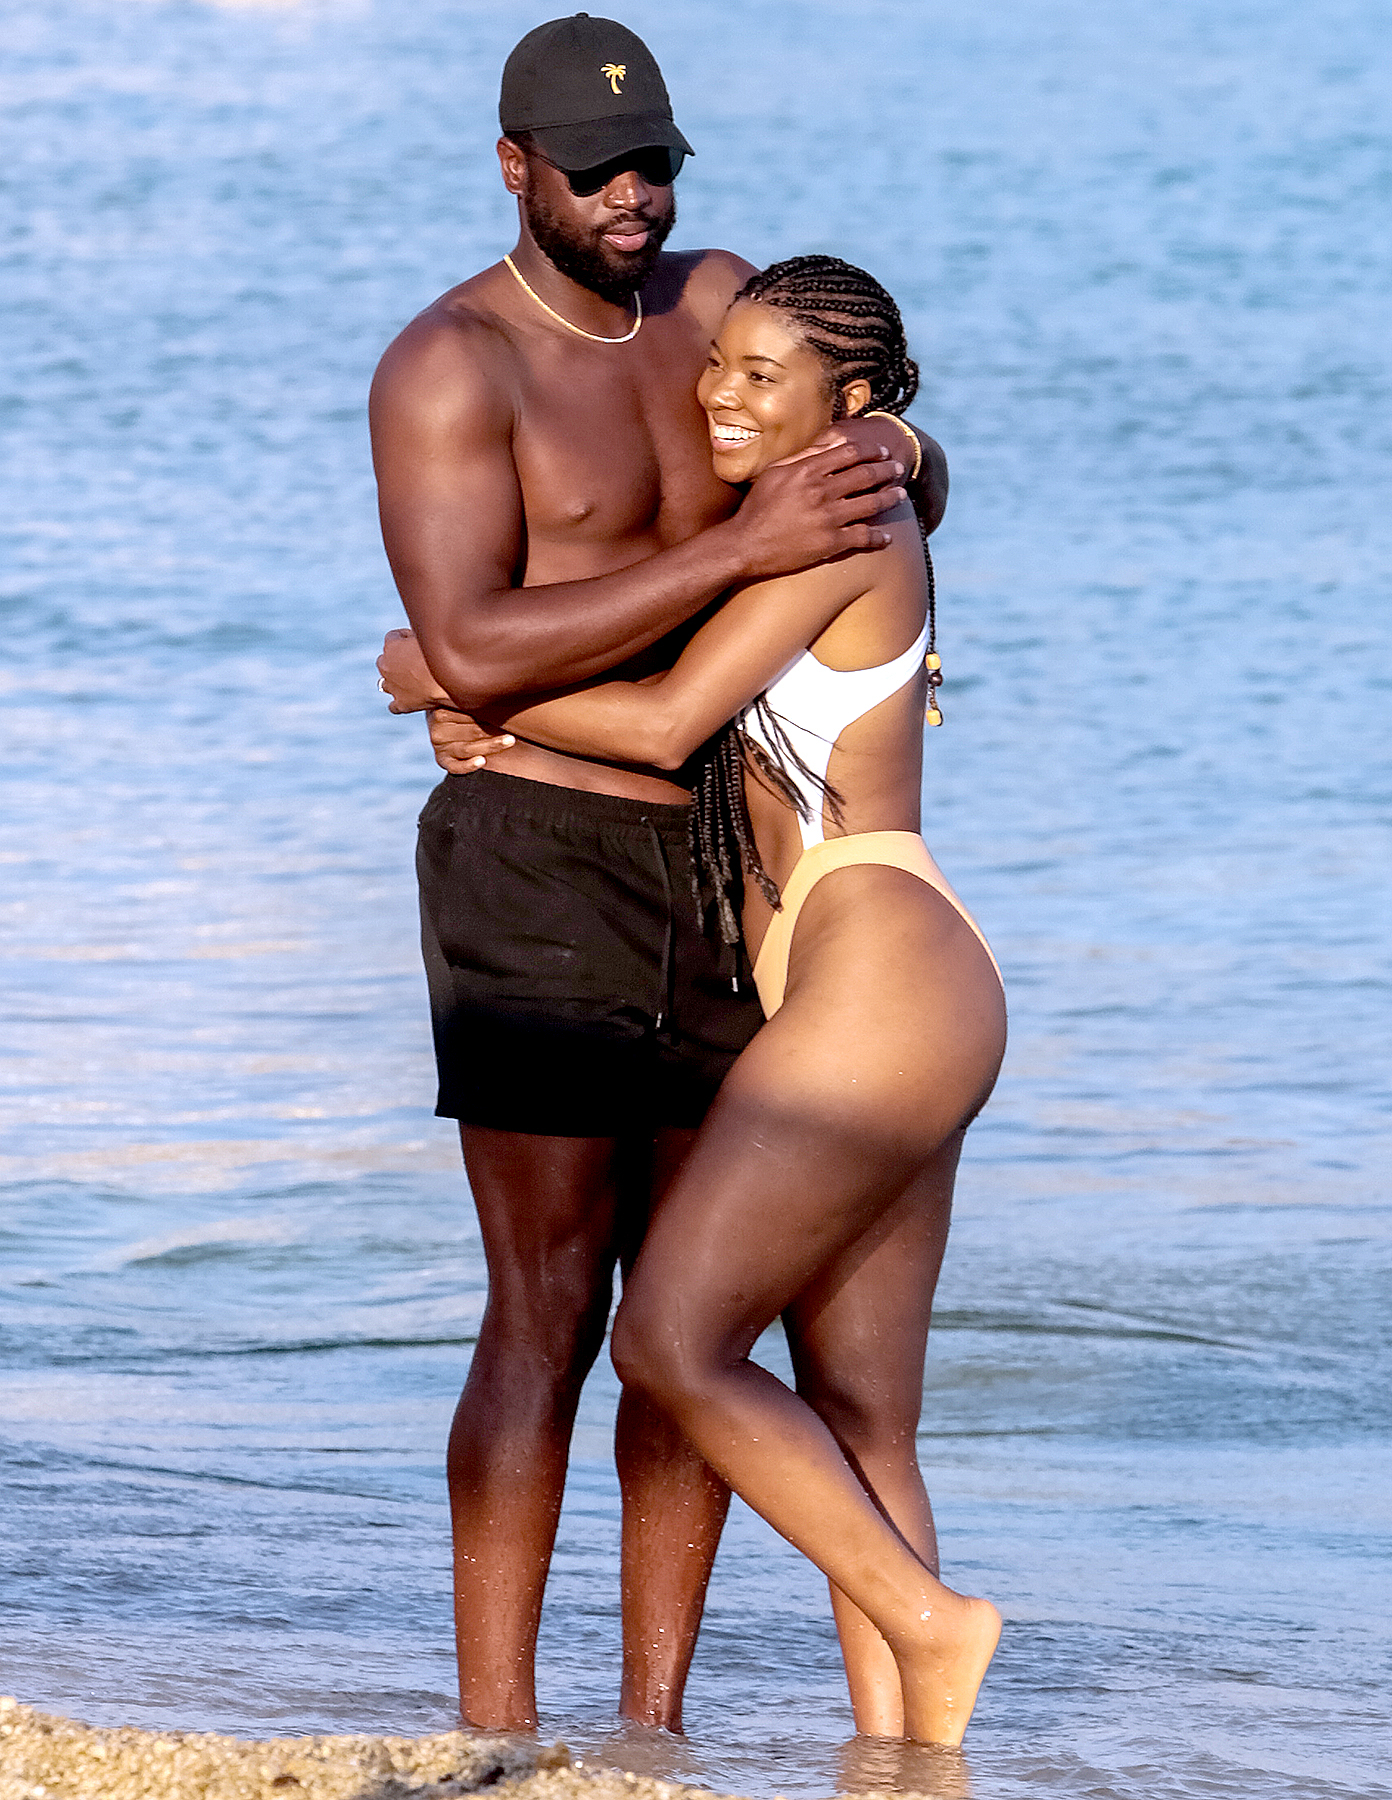 Gabrielle Union & D Wade. An underrated beautiful, hot & stylish